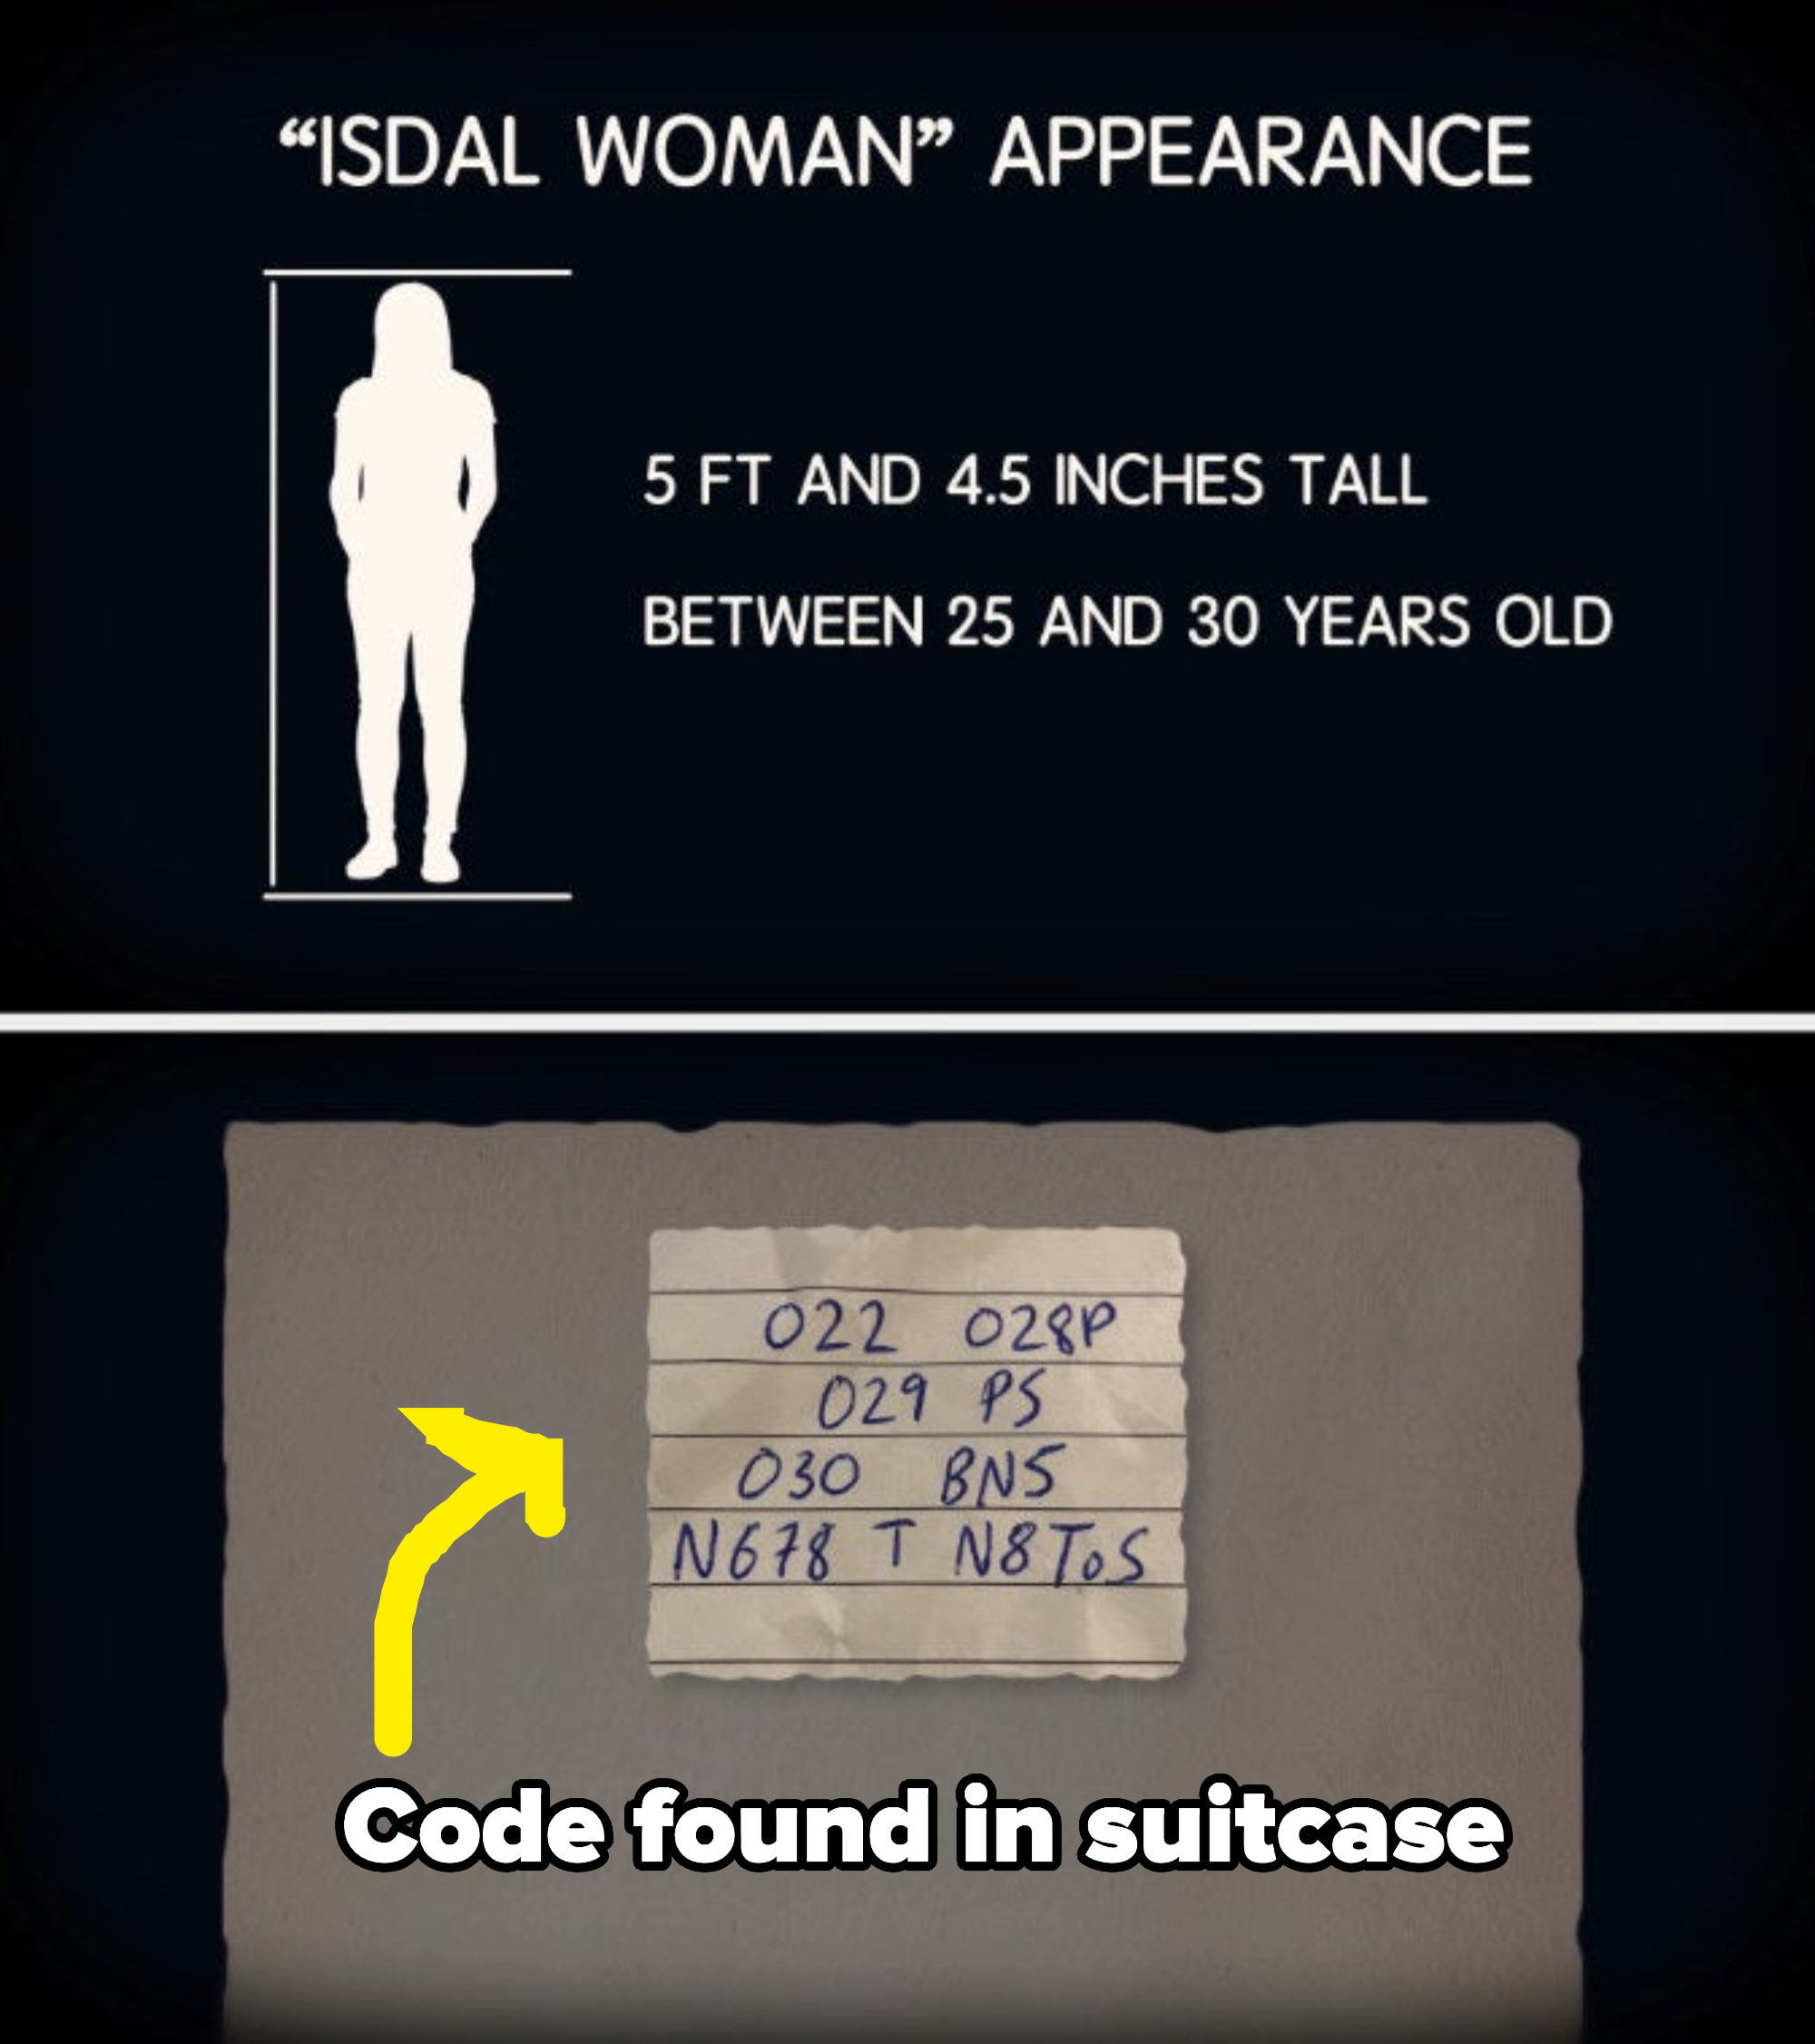 a drawing of a woman with height and age range and then a paper with a code found in a suitcase